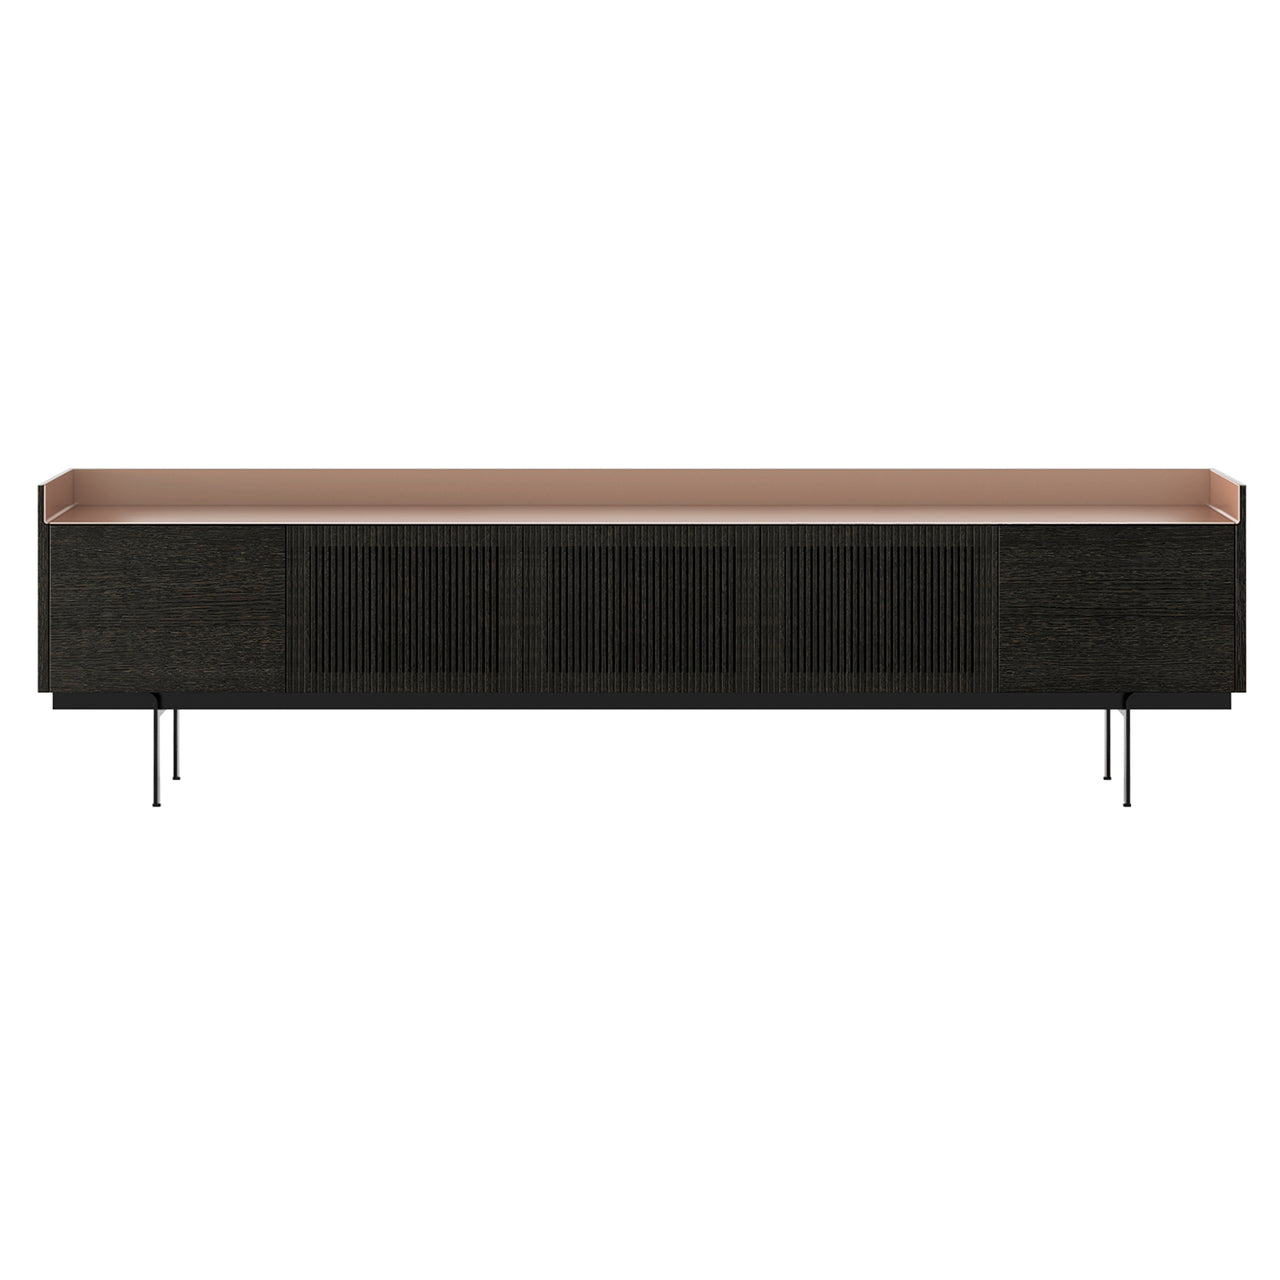 Stockholm Technic Sideboard: STH504 + Dark Grey Stained Oak + Anodized Aluminum Pale Rose + Black